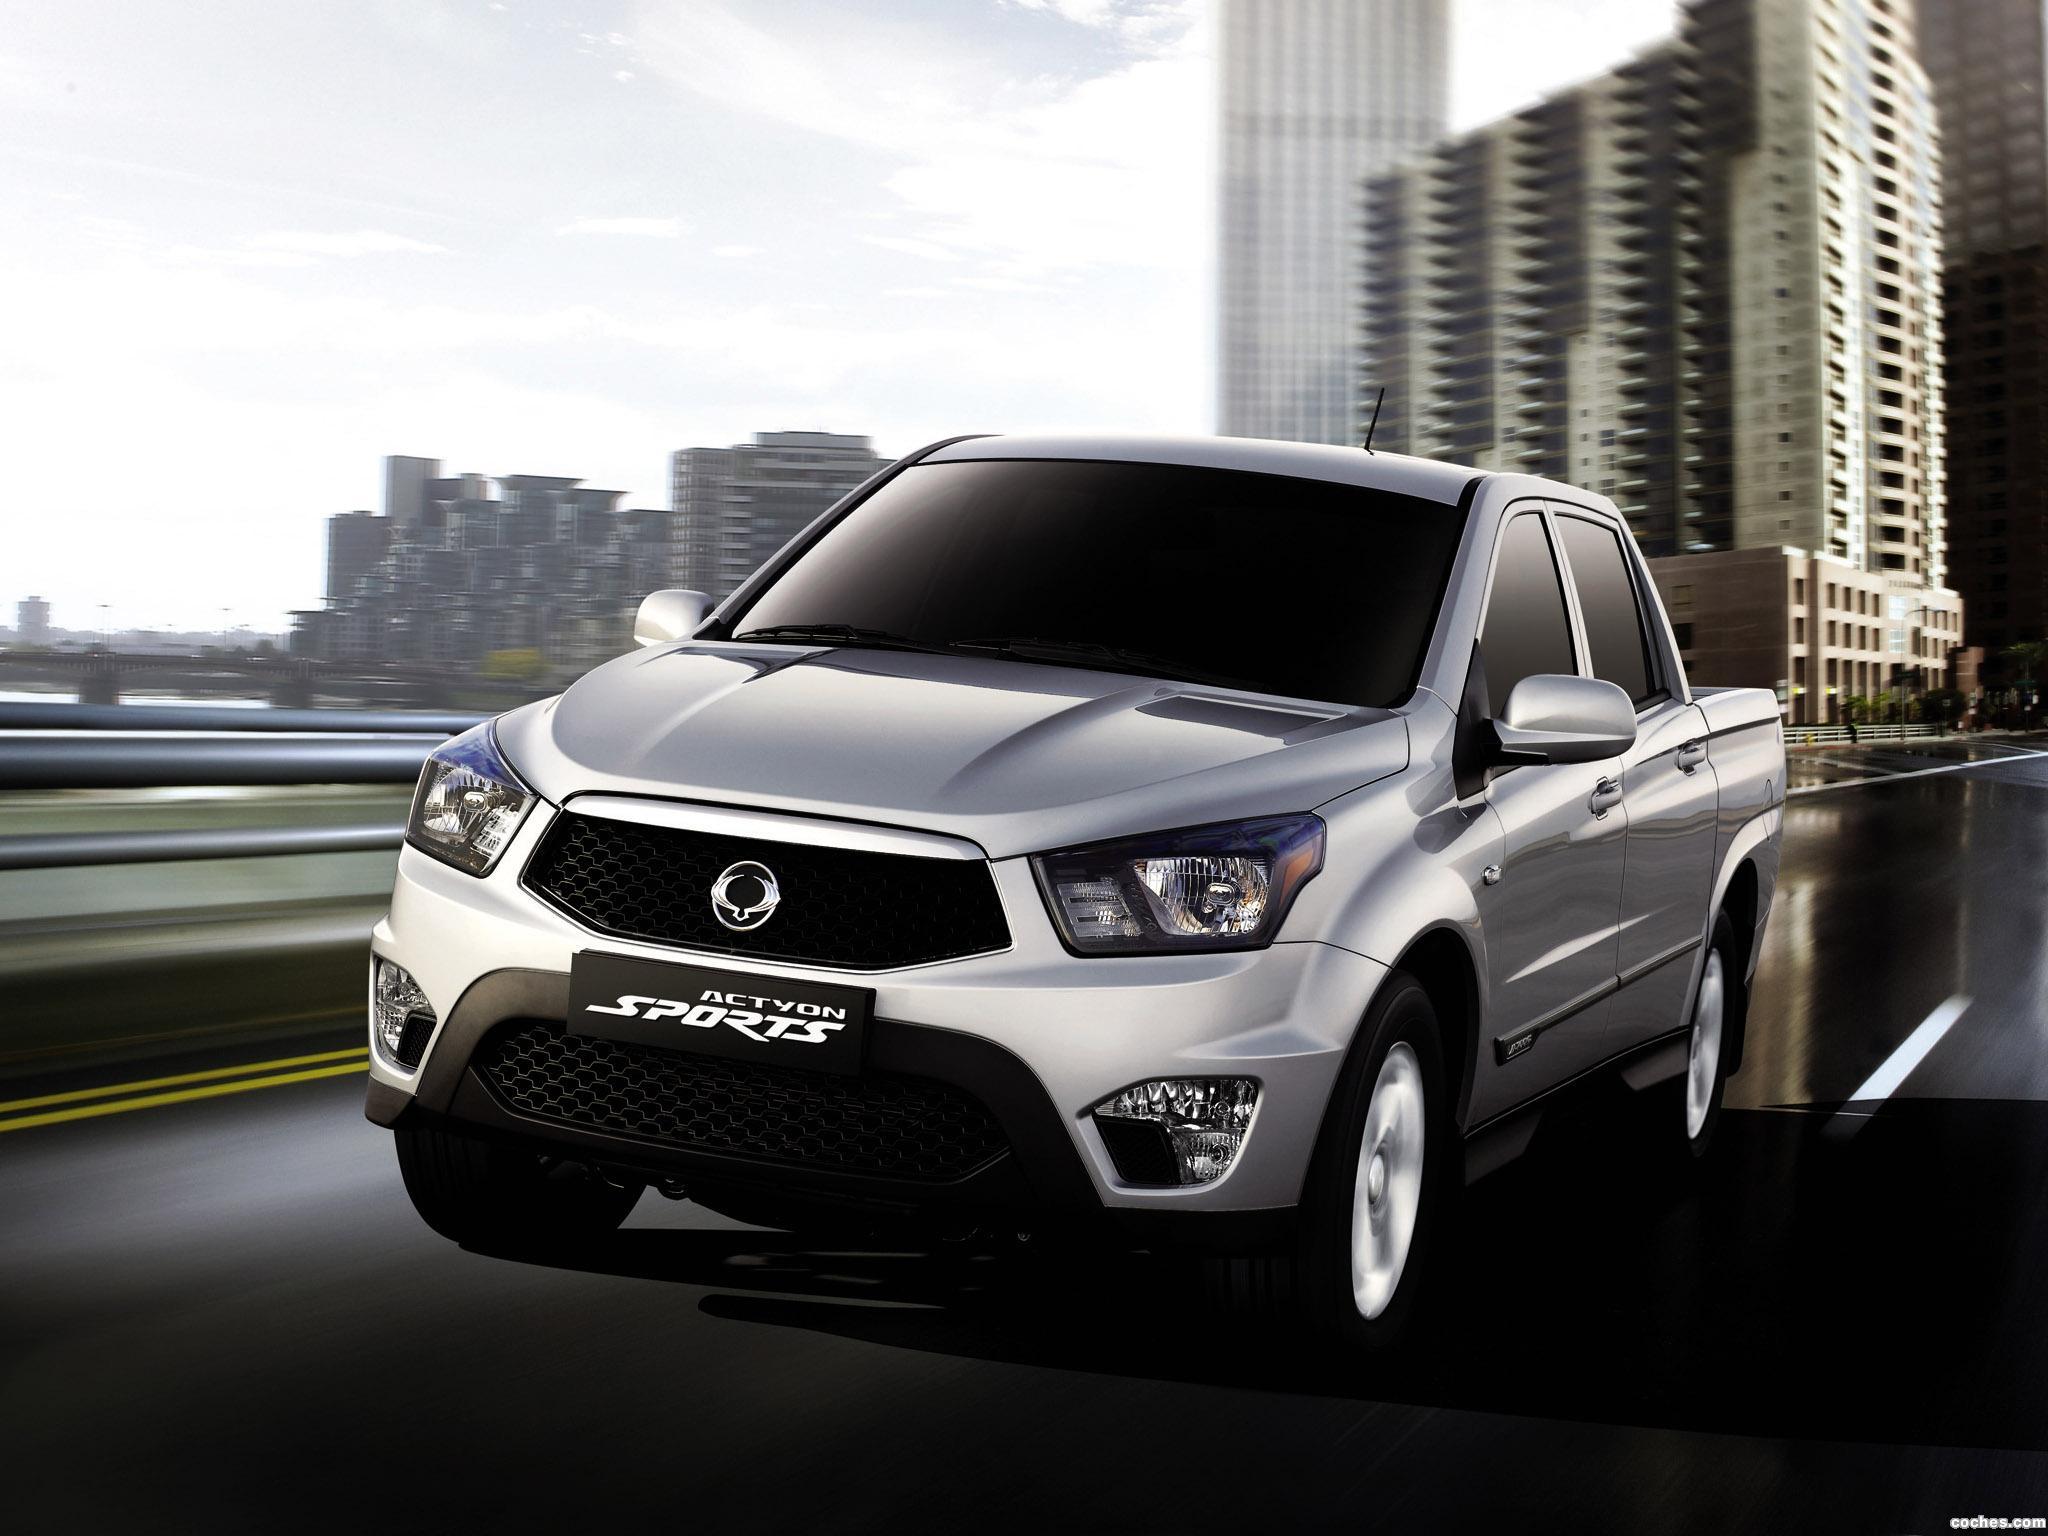 Сан янг. SSANGYONG Actyon. SSANGYONG Actyon Sports 2014. SSANGYONG SSANGYONG Actyon. SSANGYONG Actyon Sport.